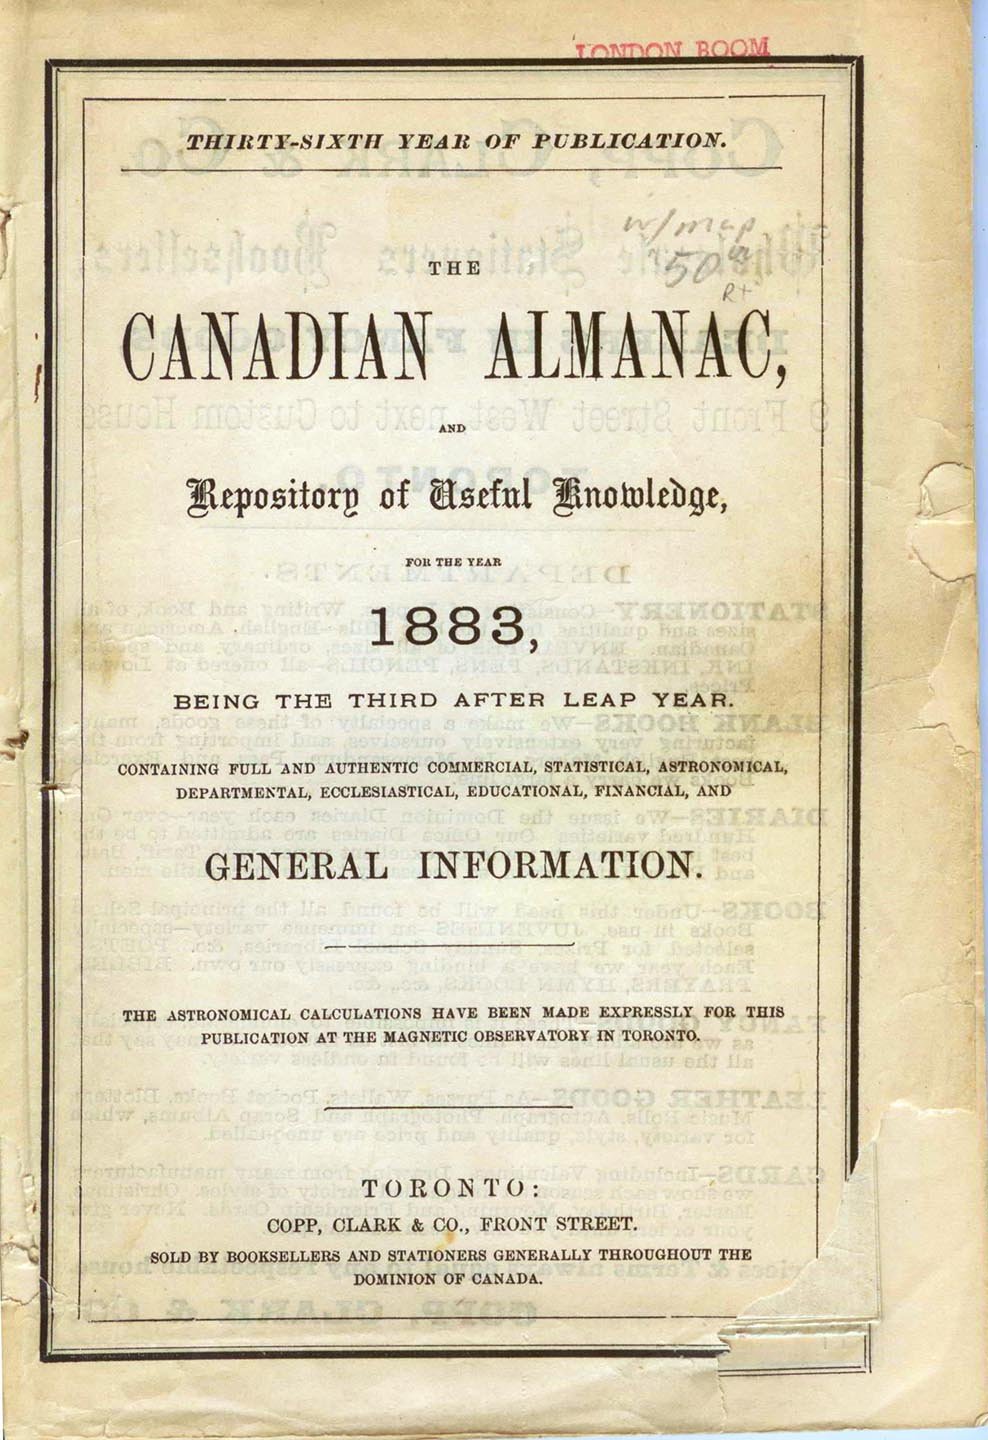 The Canadian Almanac, and Repository of Useful Knowledge for the Year 1883